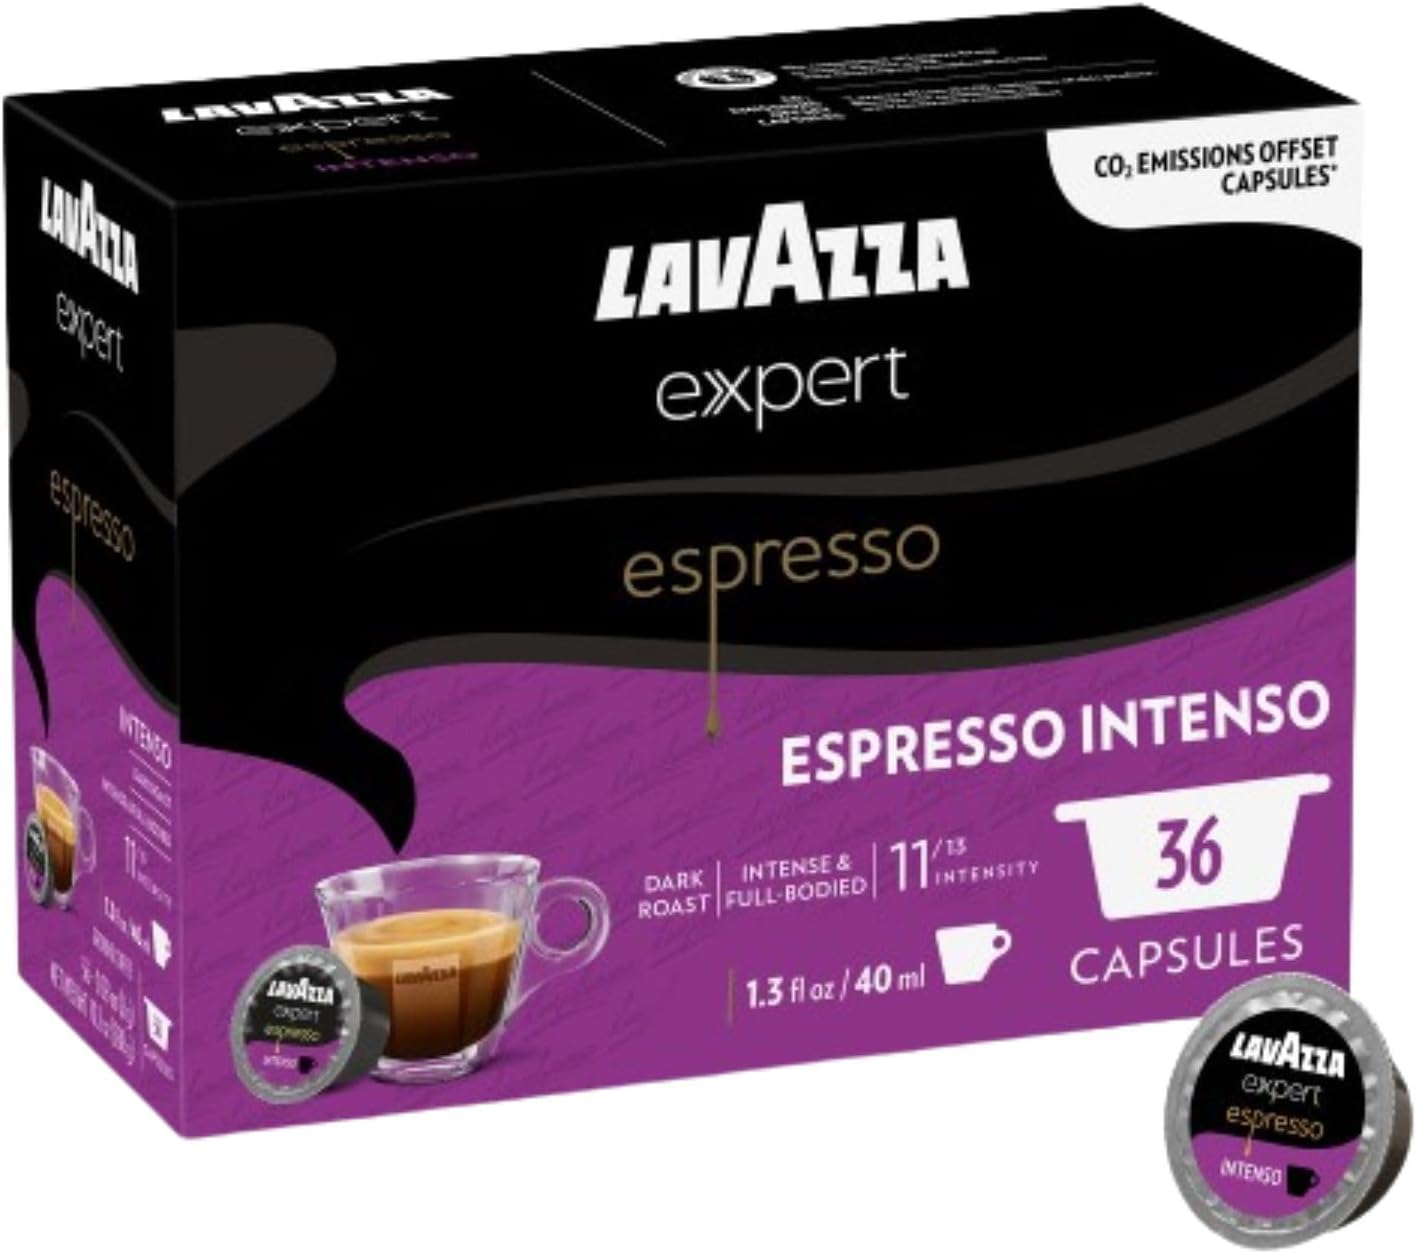 Lavazza Expert Espresso Intenso Coffee Capsules, Intense, Dark Roast, Arabica and Robusta, notes of dried fruit, Intensity 11 out 13, Espresso Preparation, Blended and Roasted in Italy, (36 Capsules)